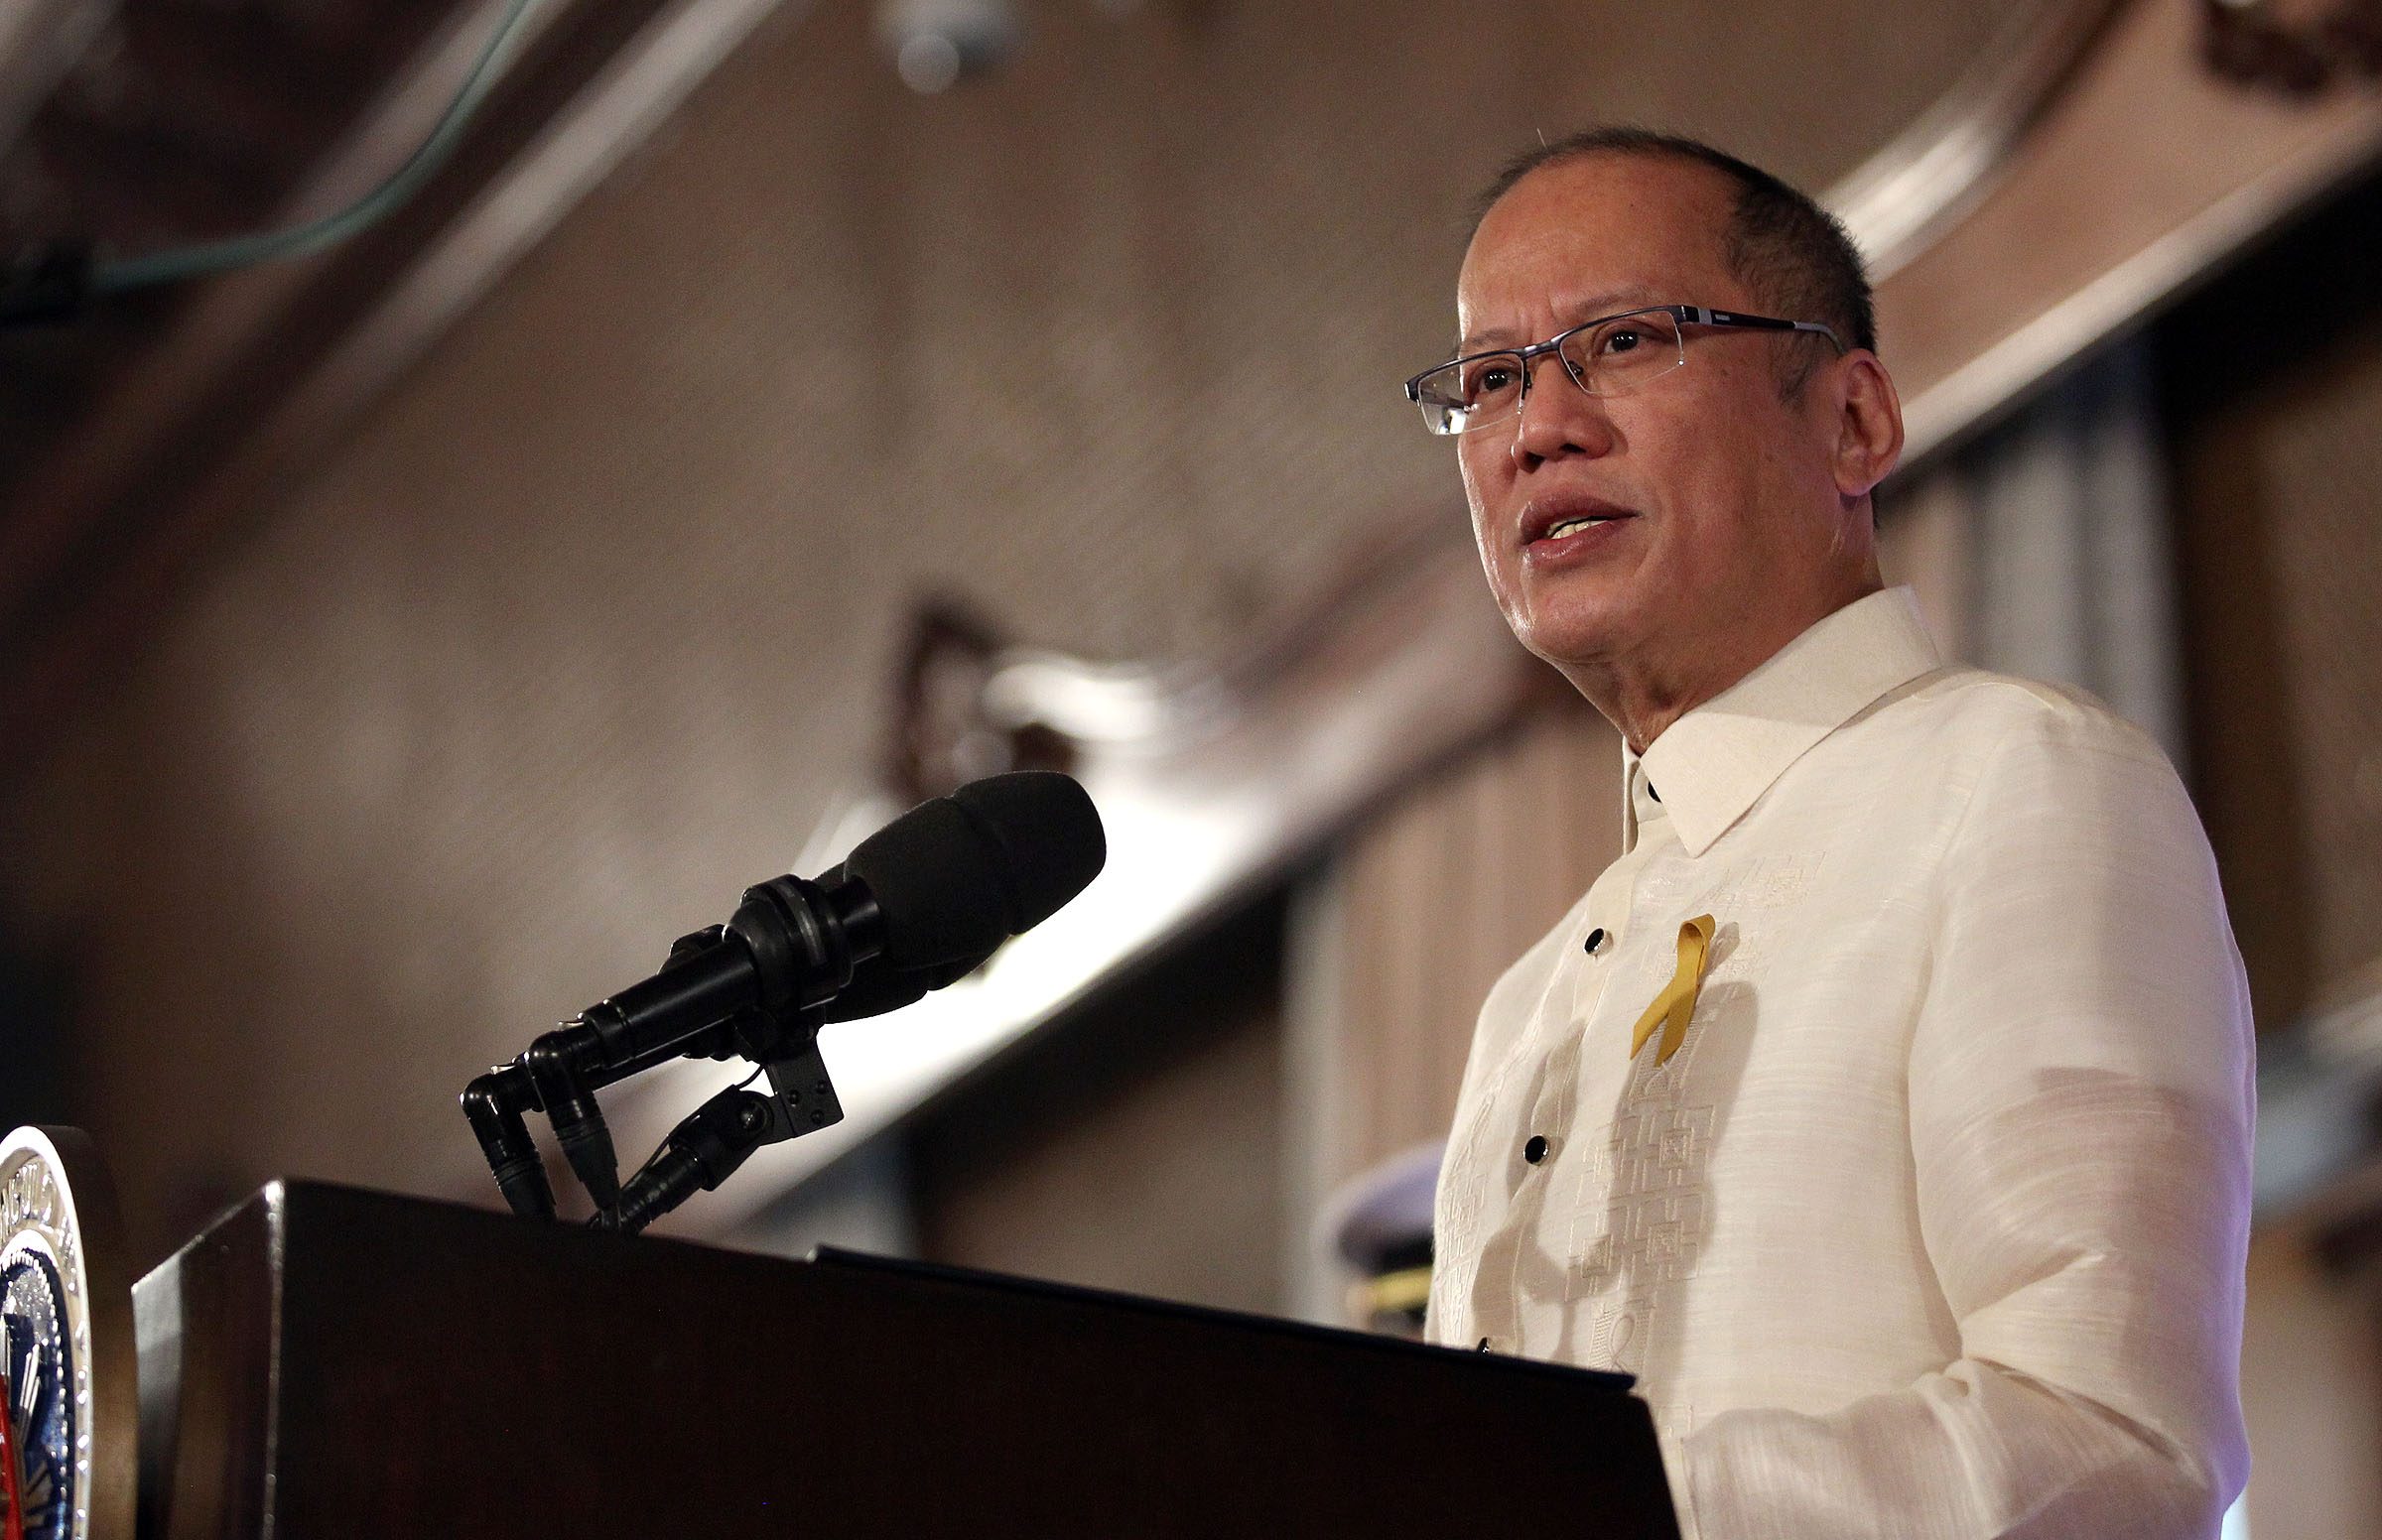 With BBL ‘dead’, Aquino to strengthen Mindanao peace gains